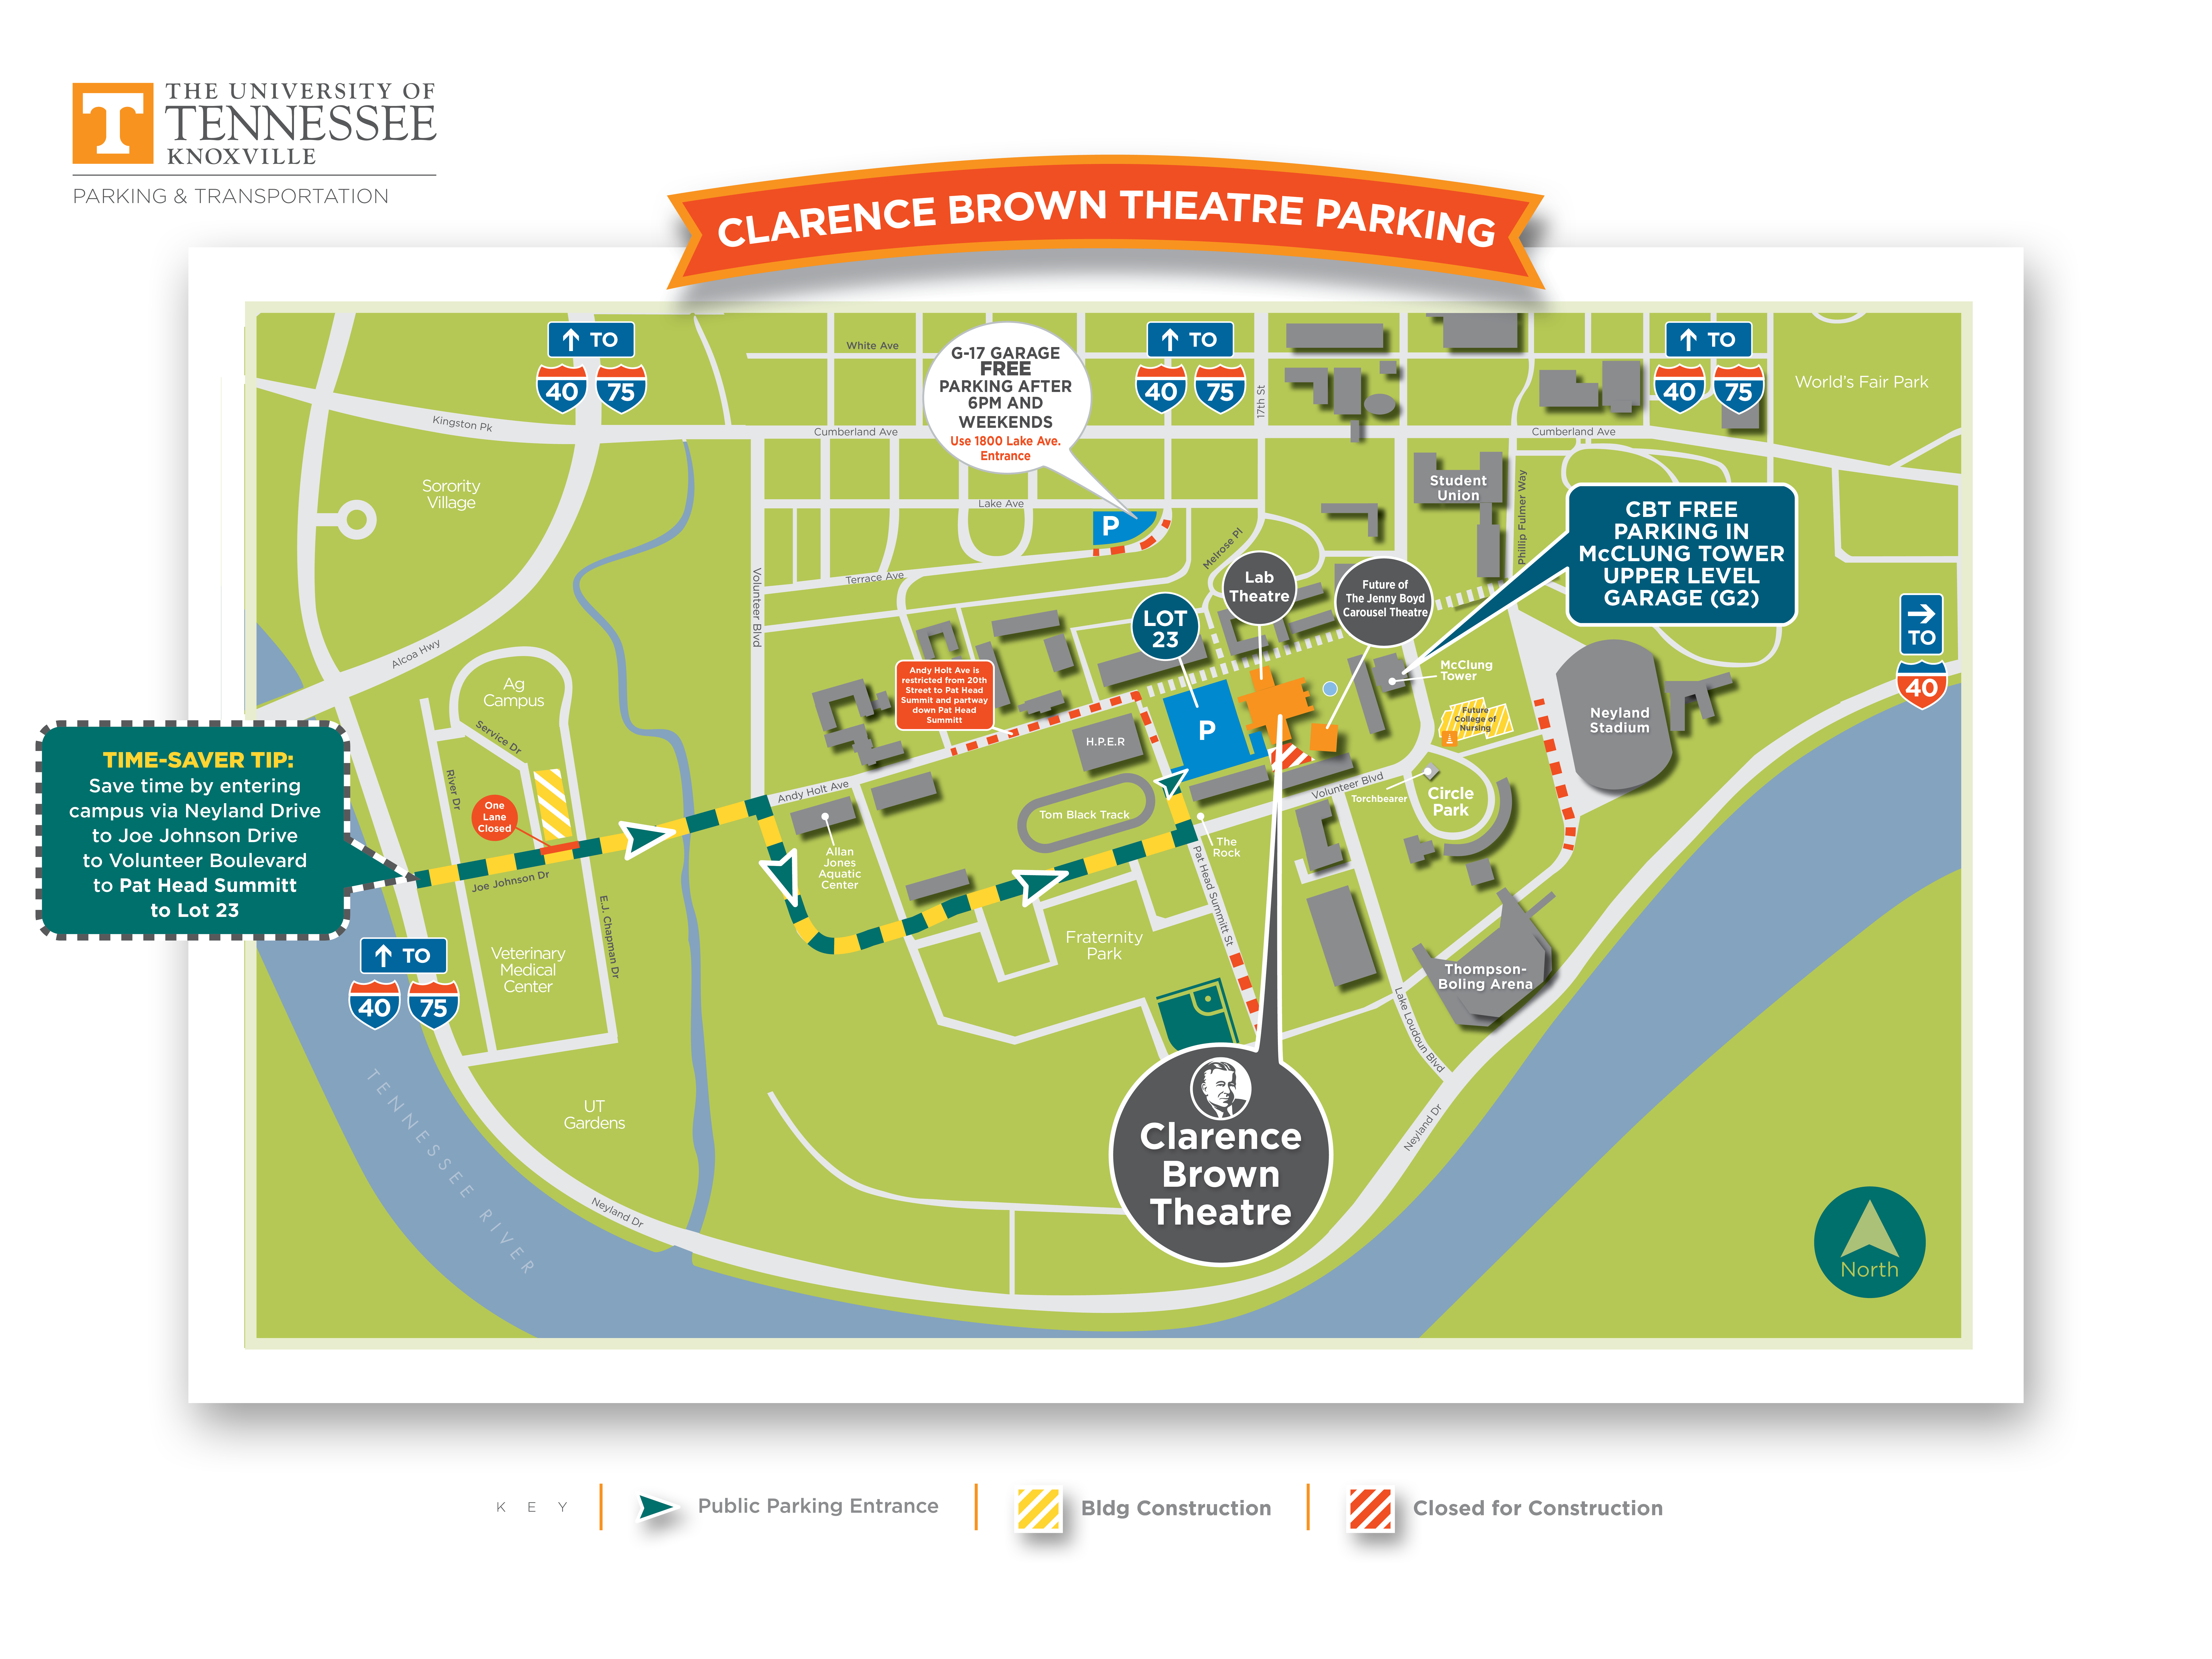 Clarence Brown Theatre parking map